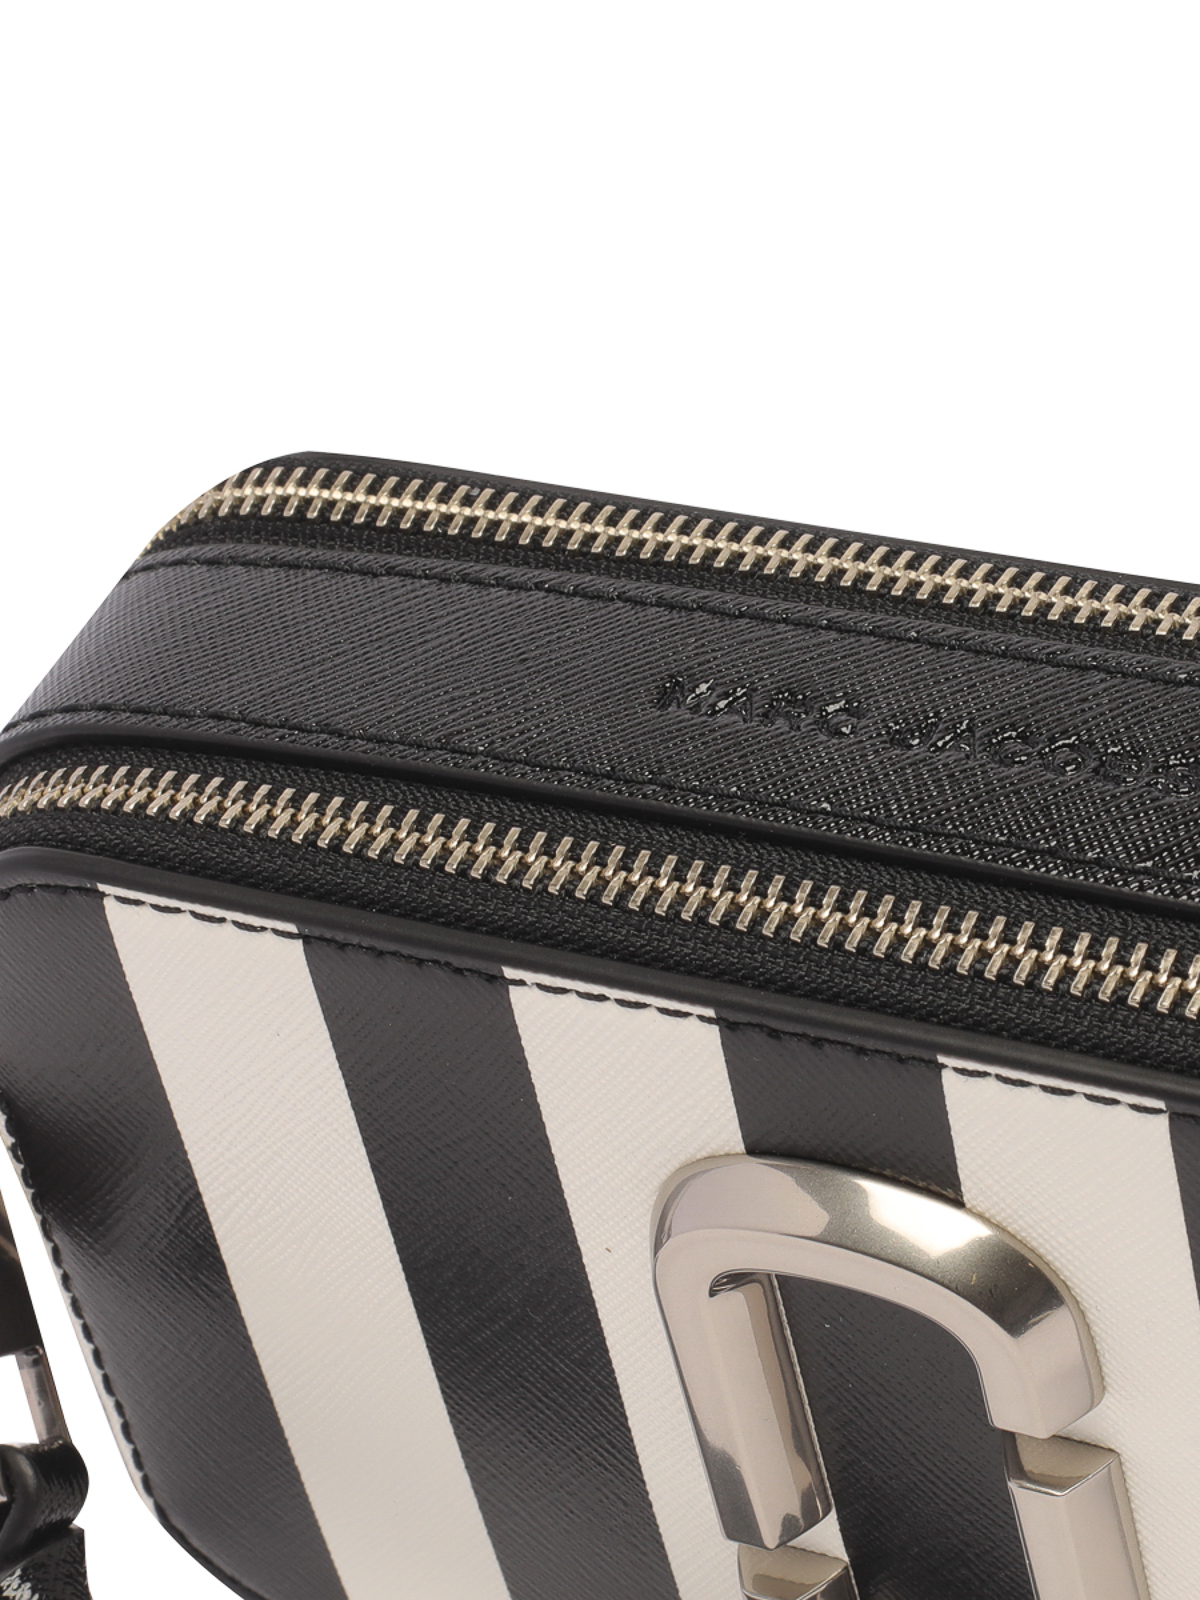 Marc Jacobs The Striped Snapshot Cross-body Bag in Black